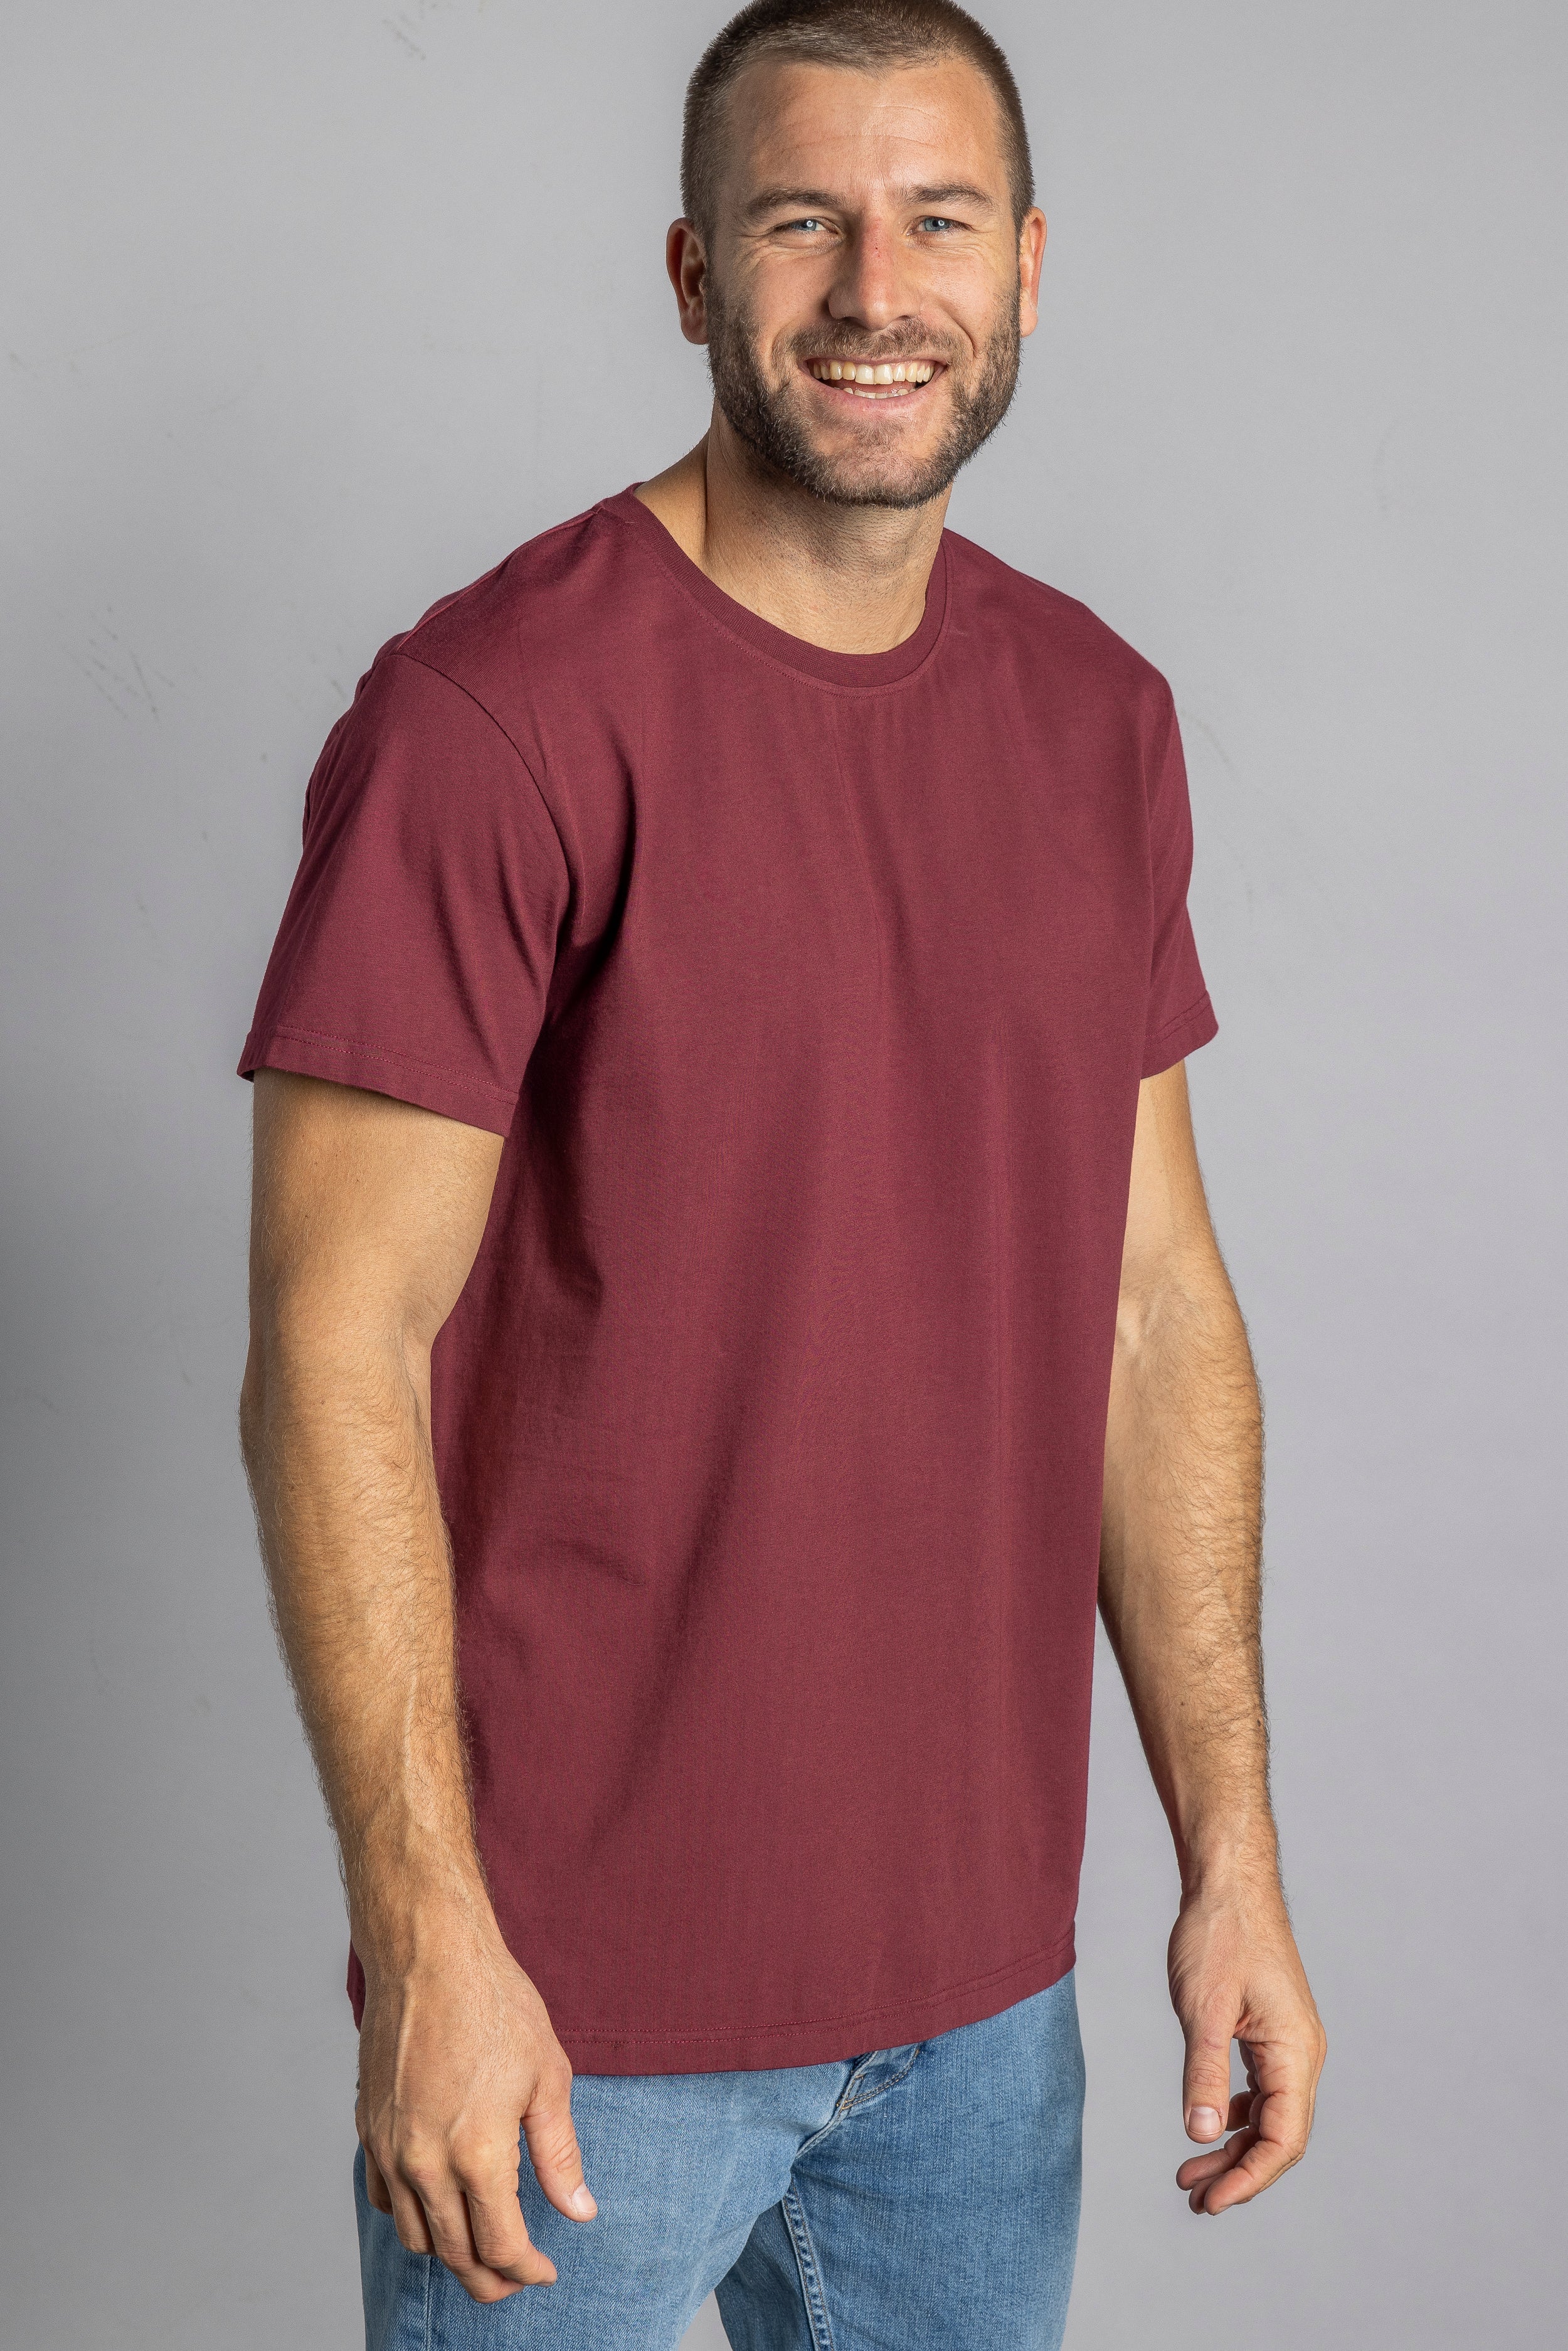 Dark red T-shirt Premium Blank Standard made from 100% organic cotton from DIRTS